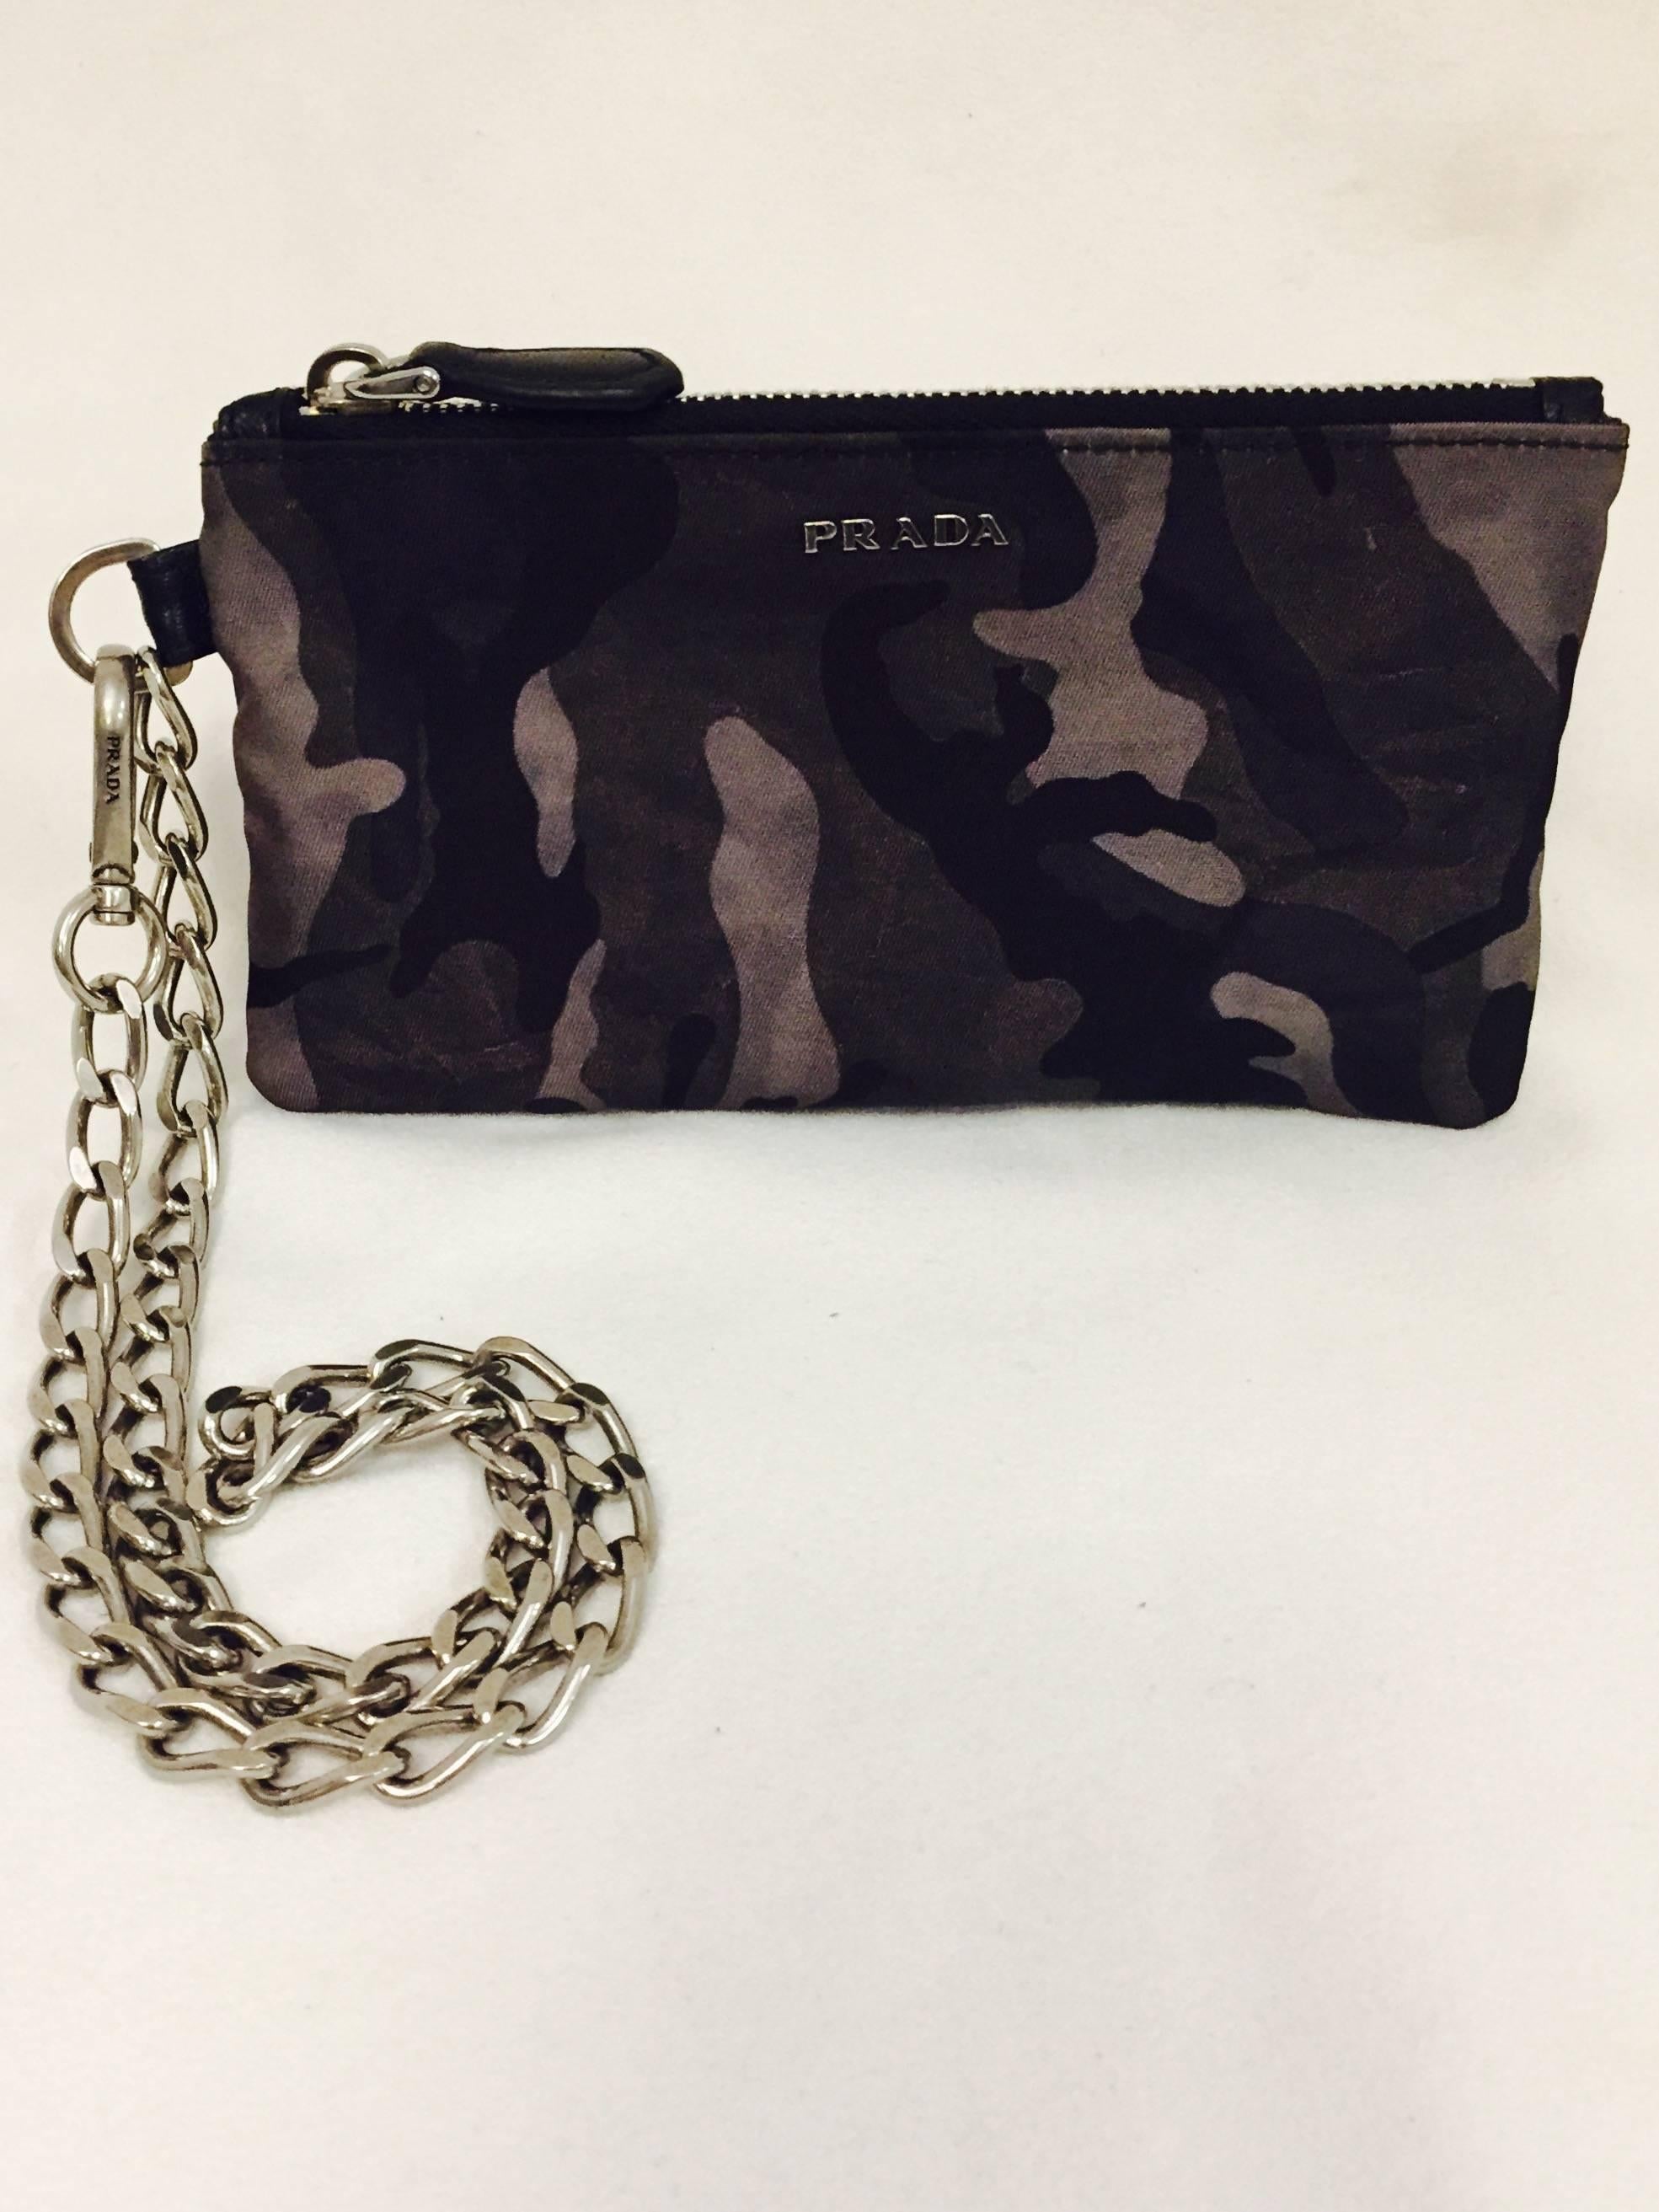 Prada's unisex, multi purpose nylon mini bag can be utilized as a wristlet, cosmetic bag or wallet that hangs from one's belt.  The small bag has a Prada logo chain that can be detached.  This is a great accessory with multi function capability